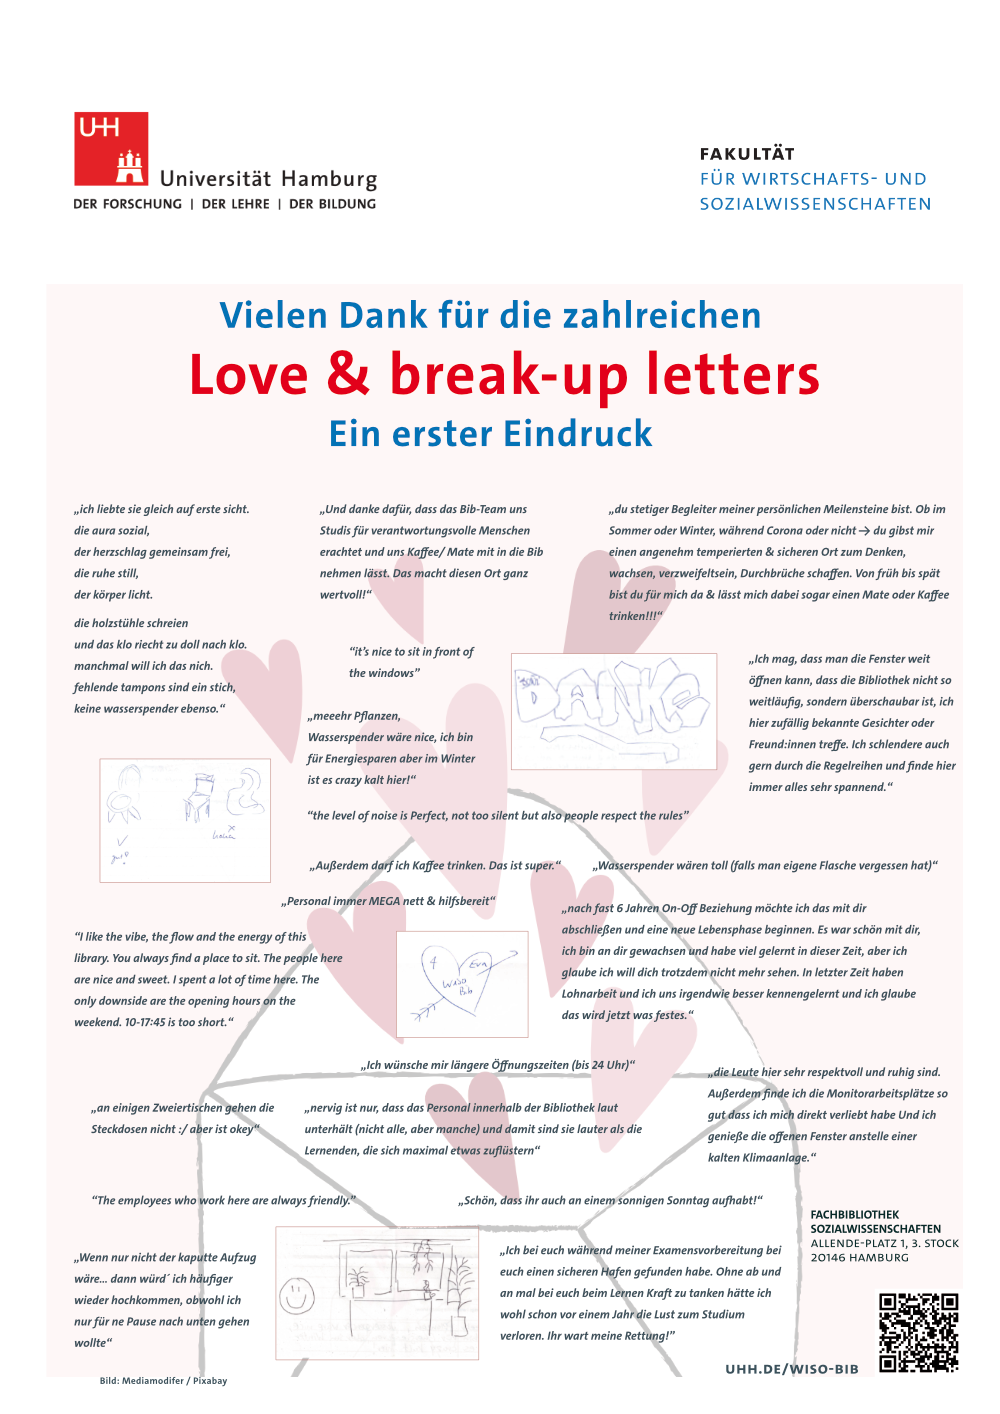 Love and break-up letter Sowi-Bib